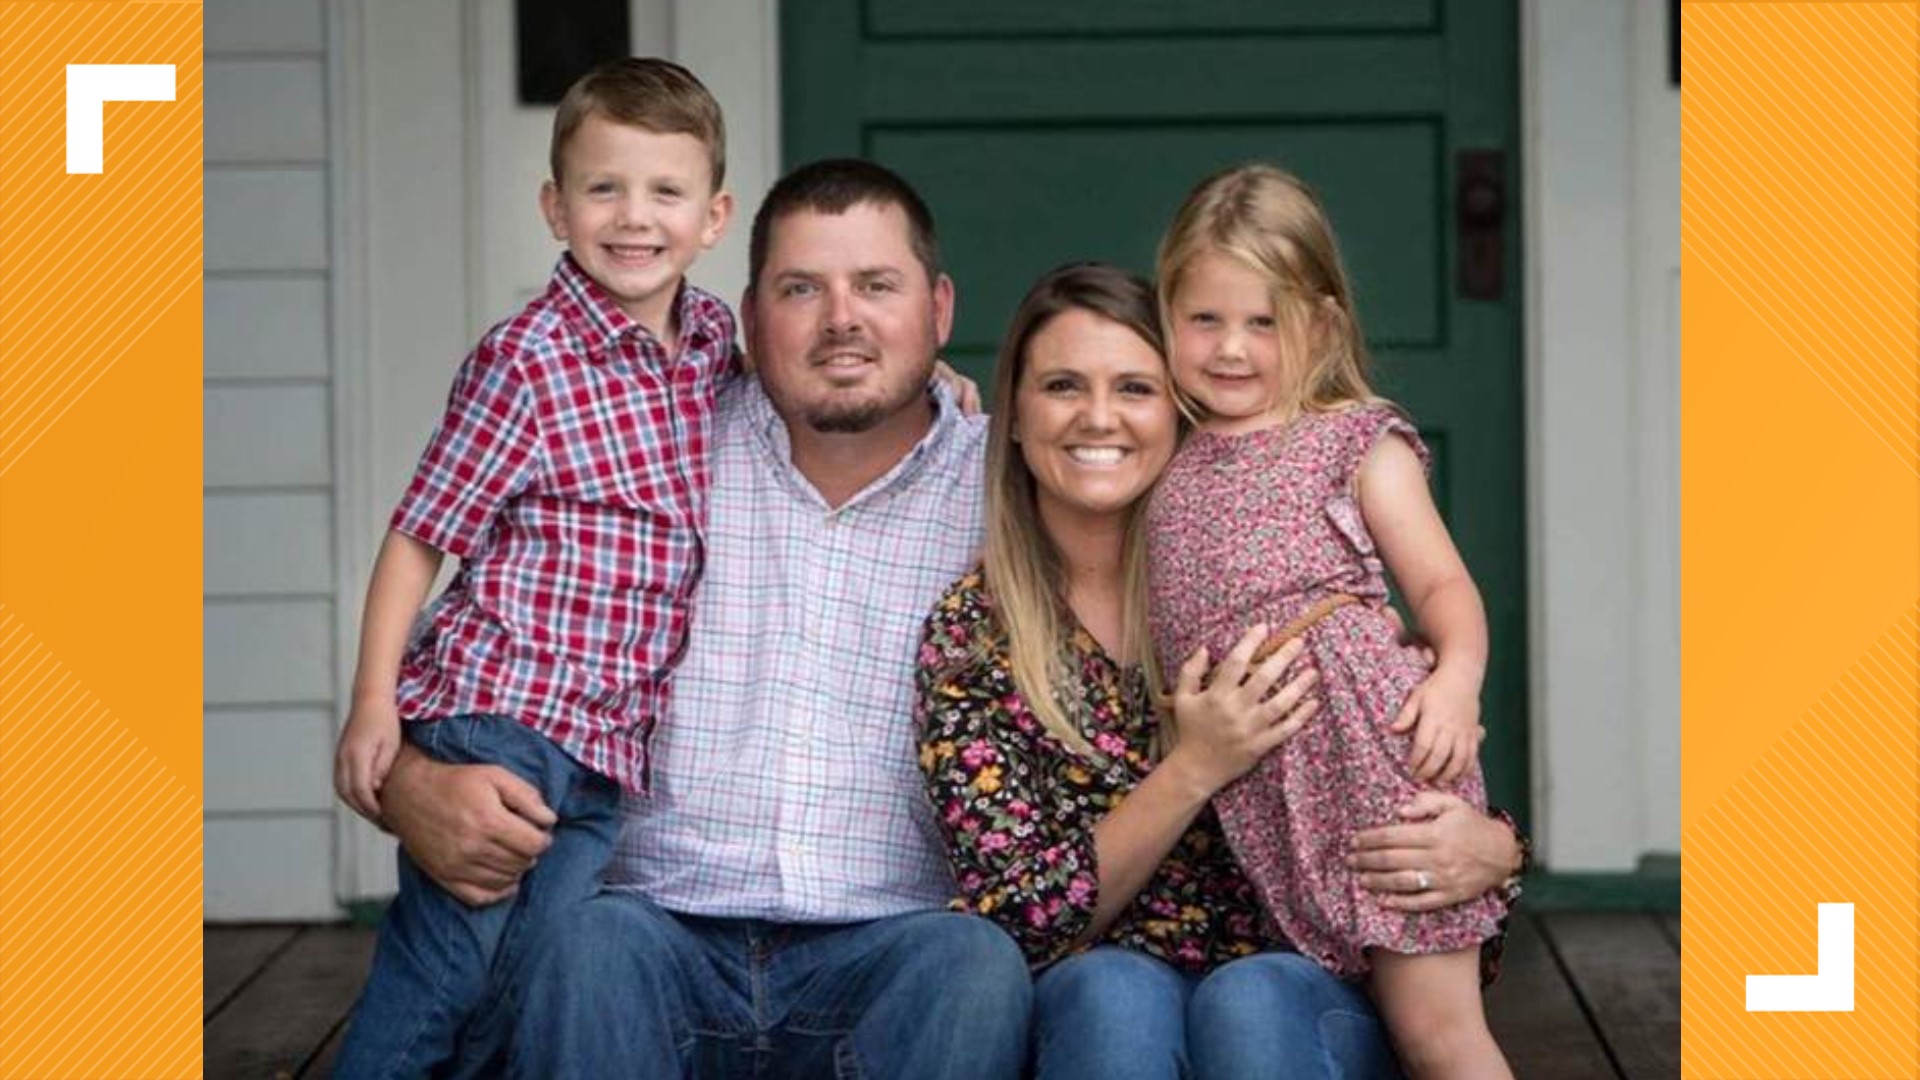 Travis Long is professional lineman who works at Snapping Shoals. He celebrated his 32nd birthday away from his family but they are all making the best of it.